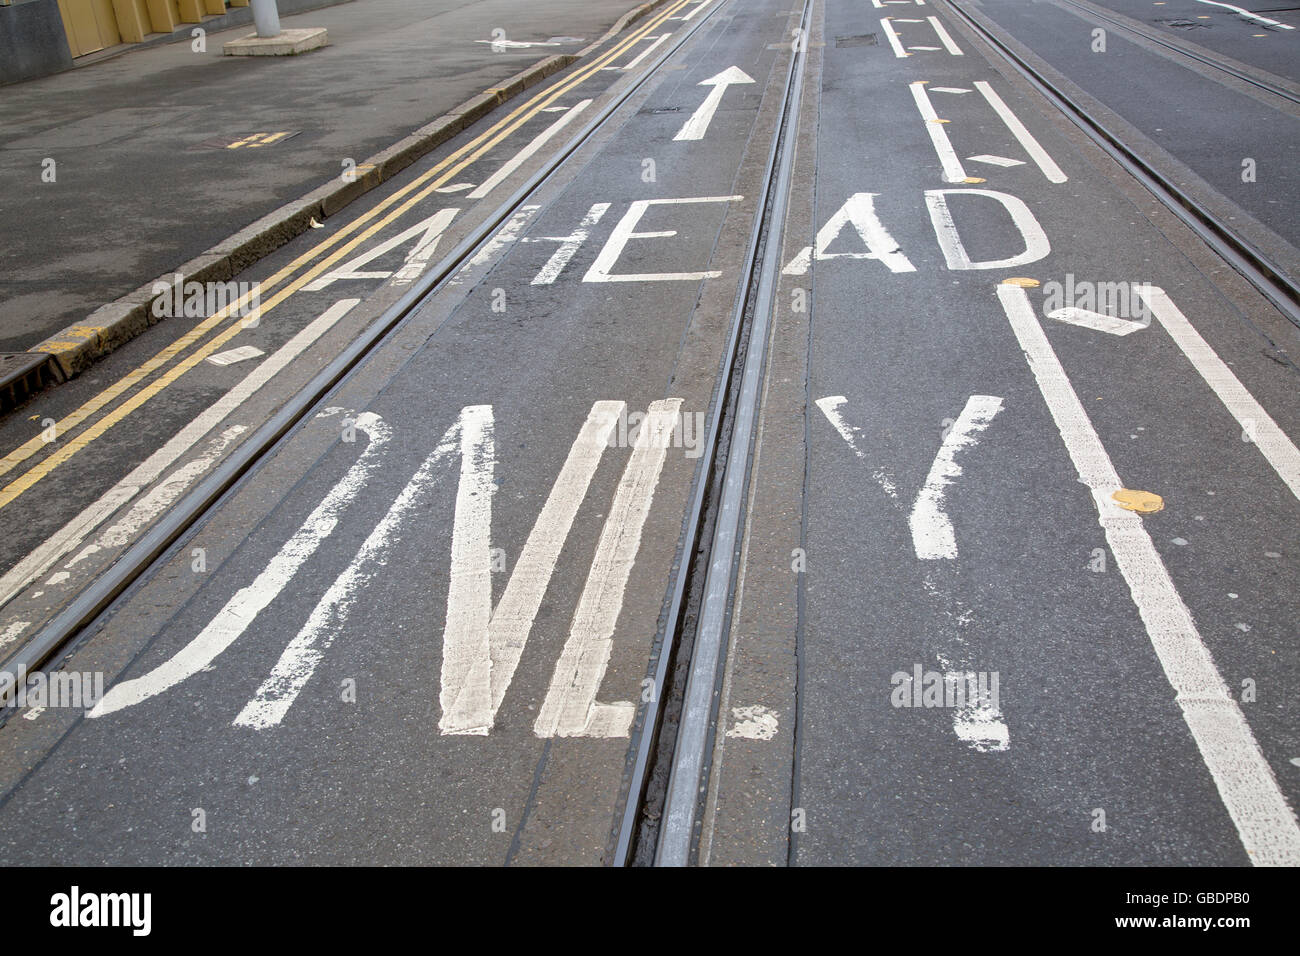 Tram Tracks and Arrow Sign on Street in Nottingham, England, UK Stock Photo